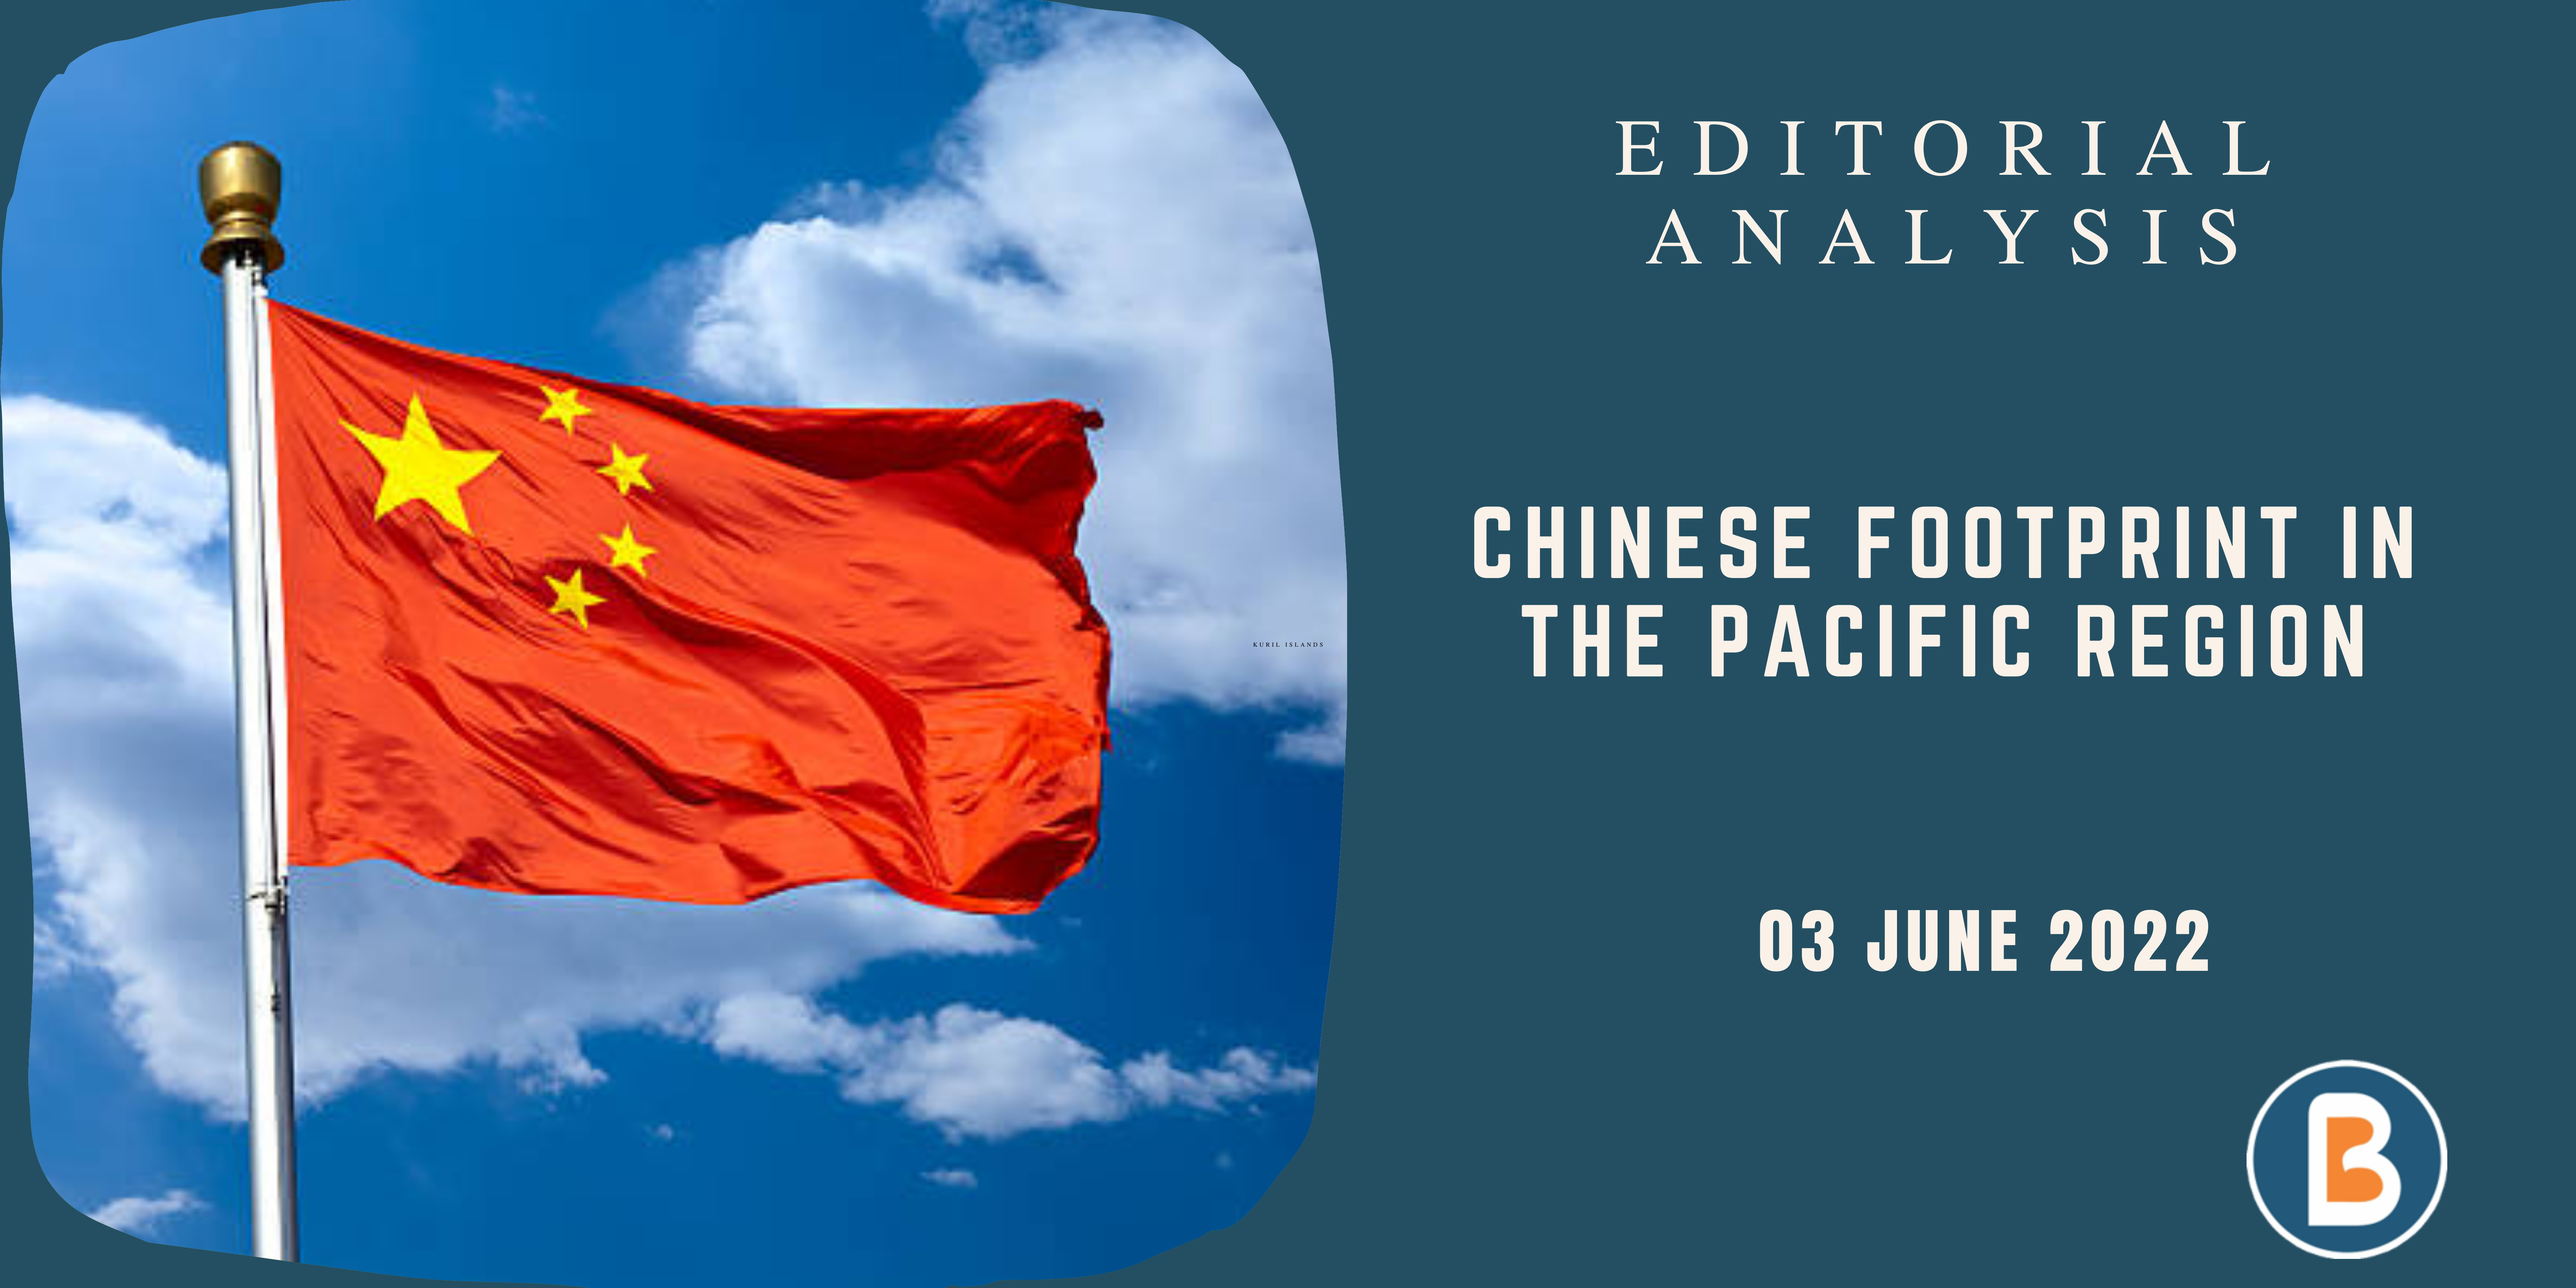 Editorial Analysis for Civil Services - Chinese Footprint in the Pacific Region